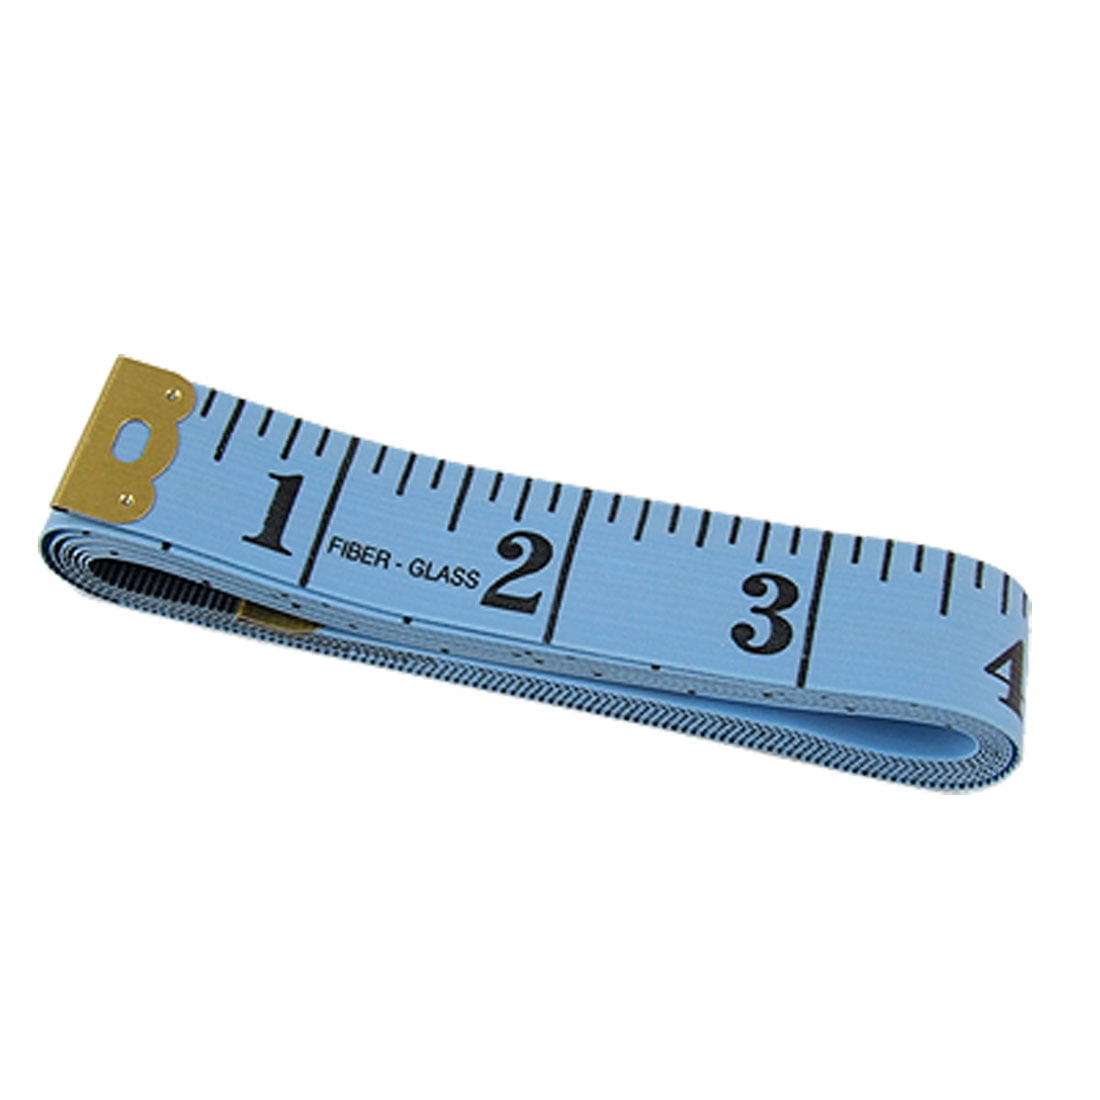 BODY MEASURING RULER SEWING CLOTH TAILOR SOFT FLAT 60IN 150CM L6C0 